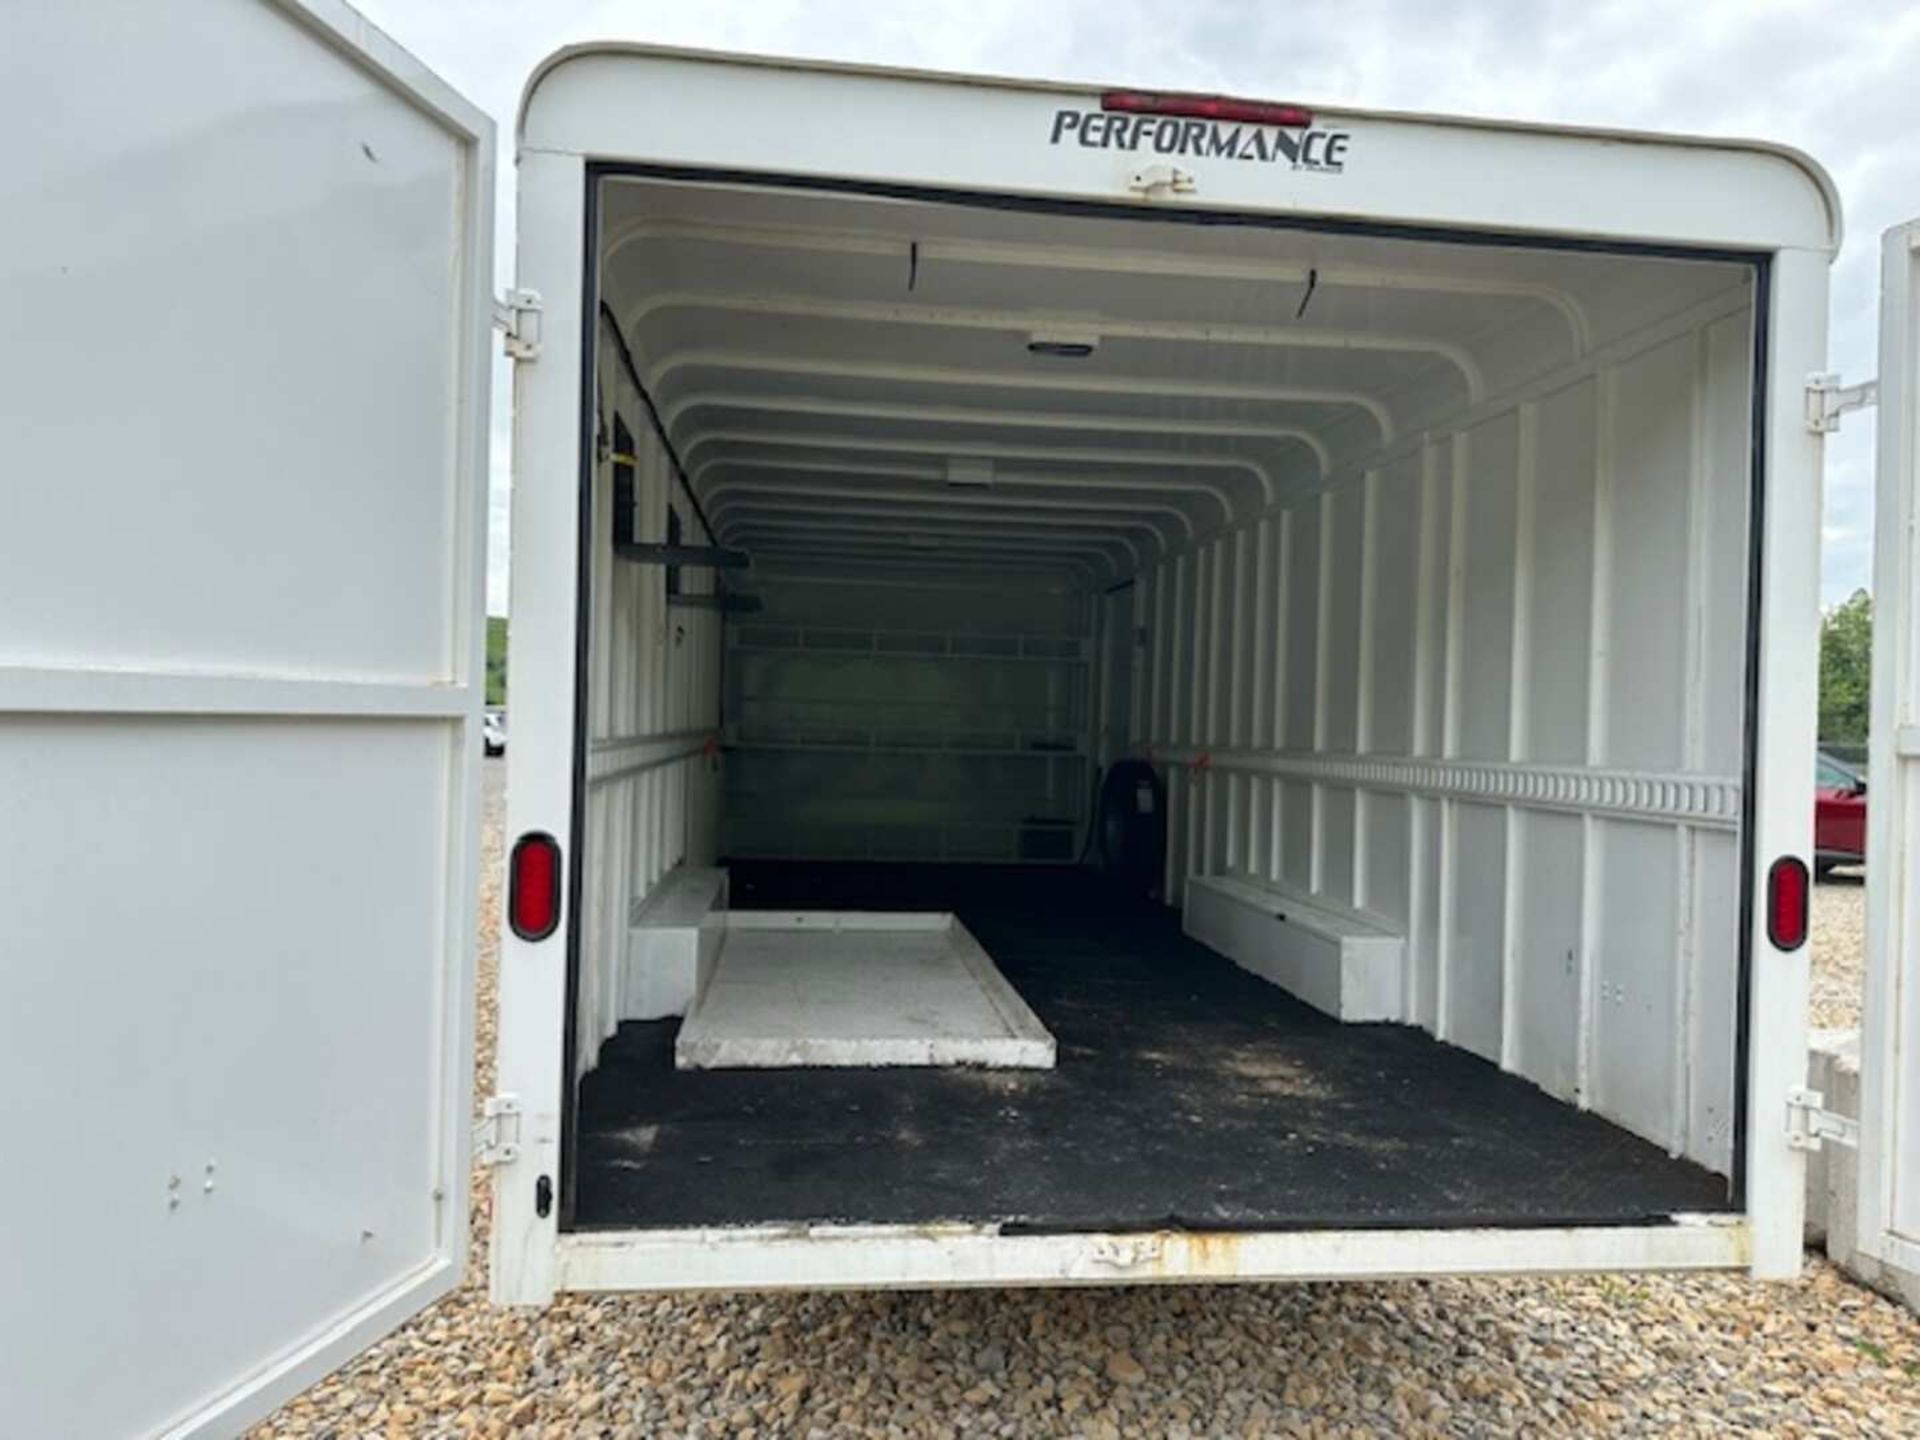 2019 PERFORMANCE TRAILERS BY PARKER 8'6"W X 25'L - Image 4 of 4